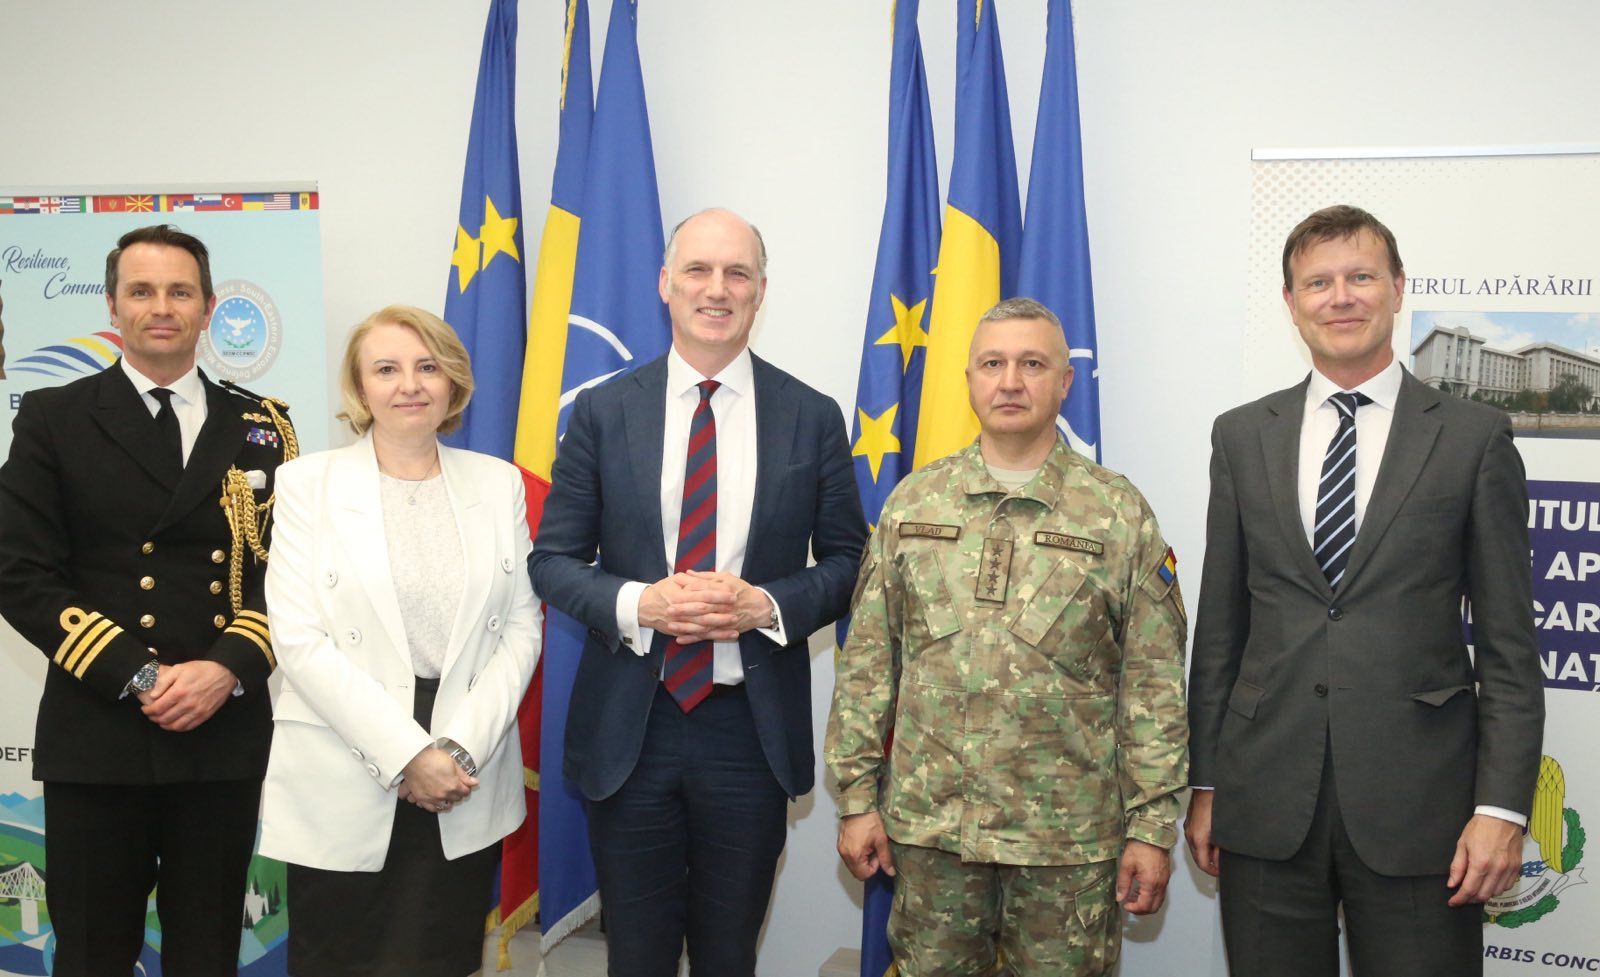 Armed Forces minister hails unity of support for Ukraine and Black Sea security during Europe visits